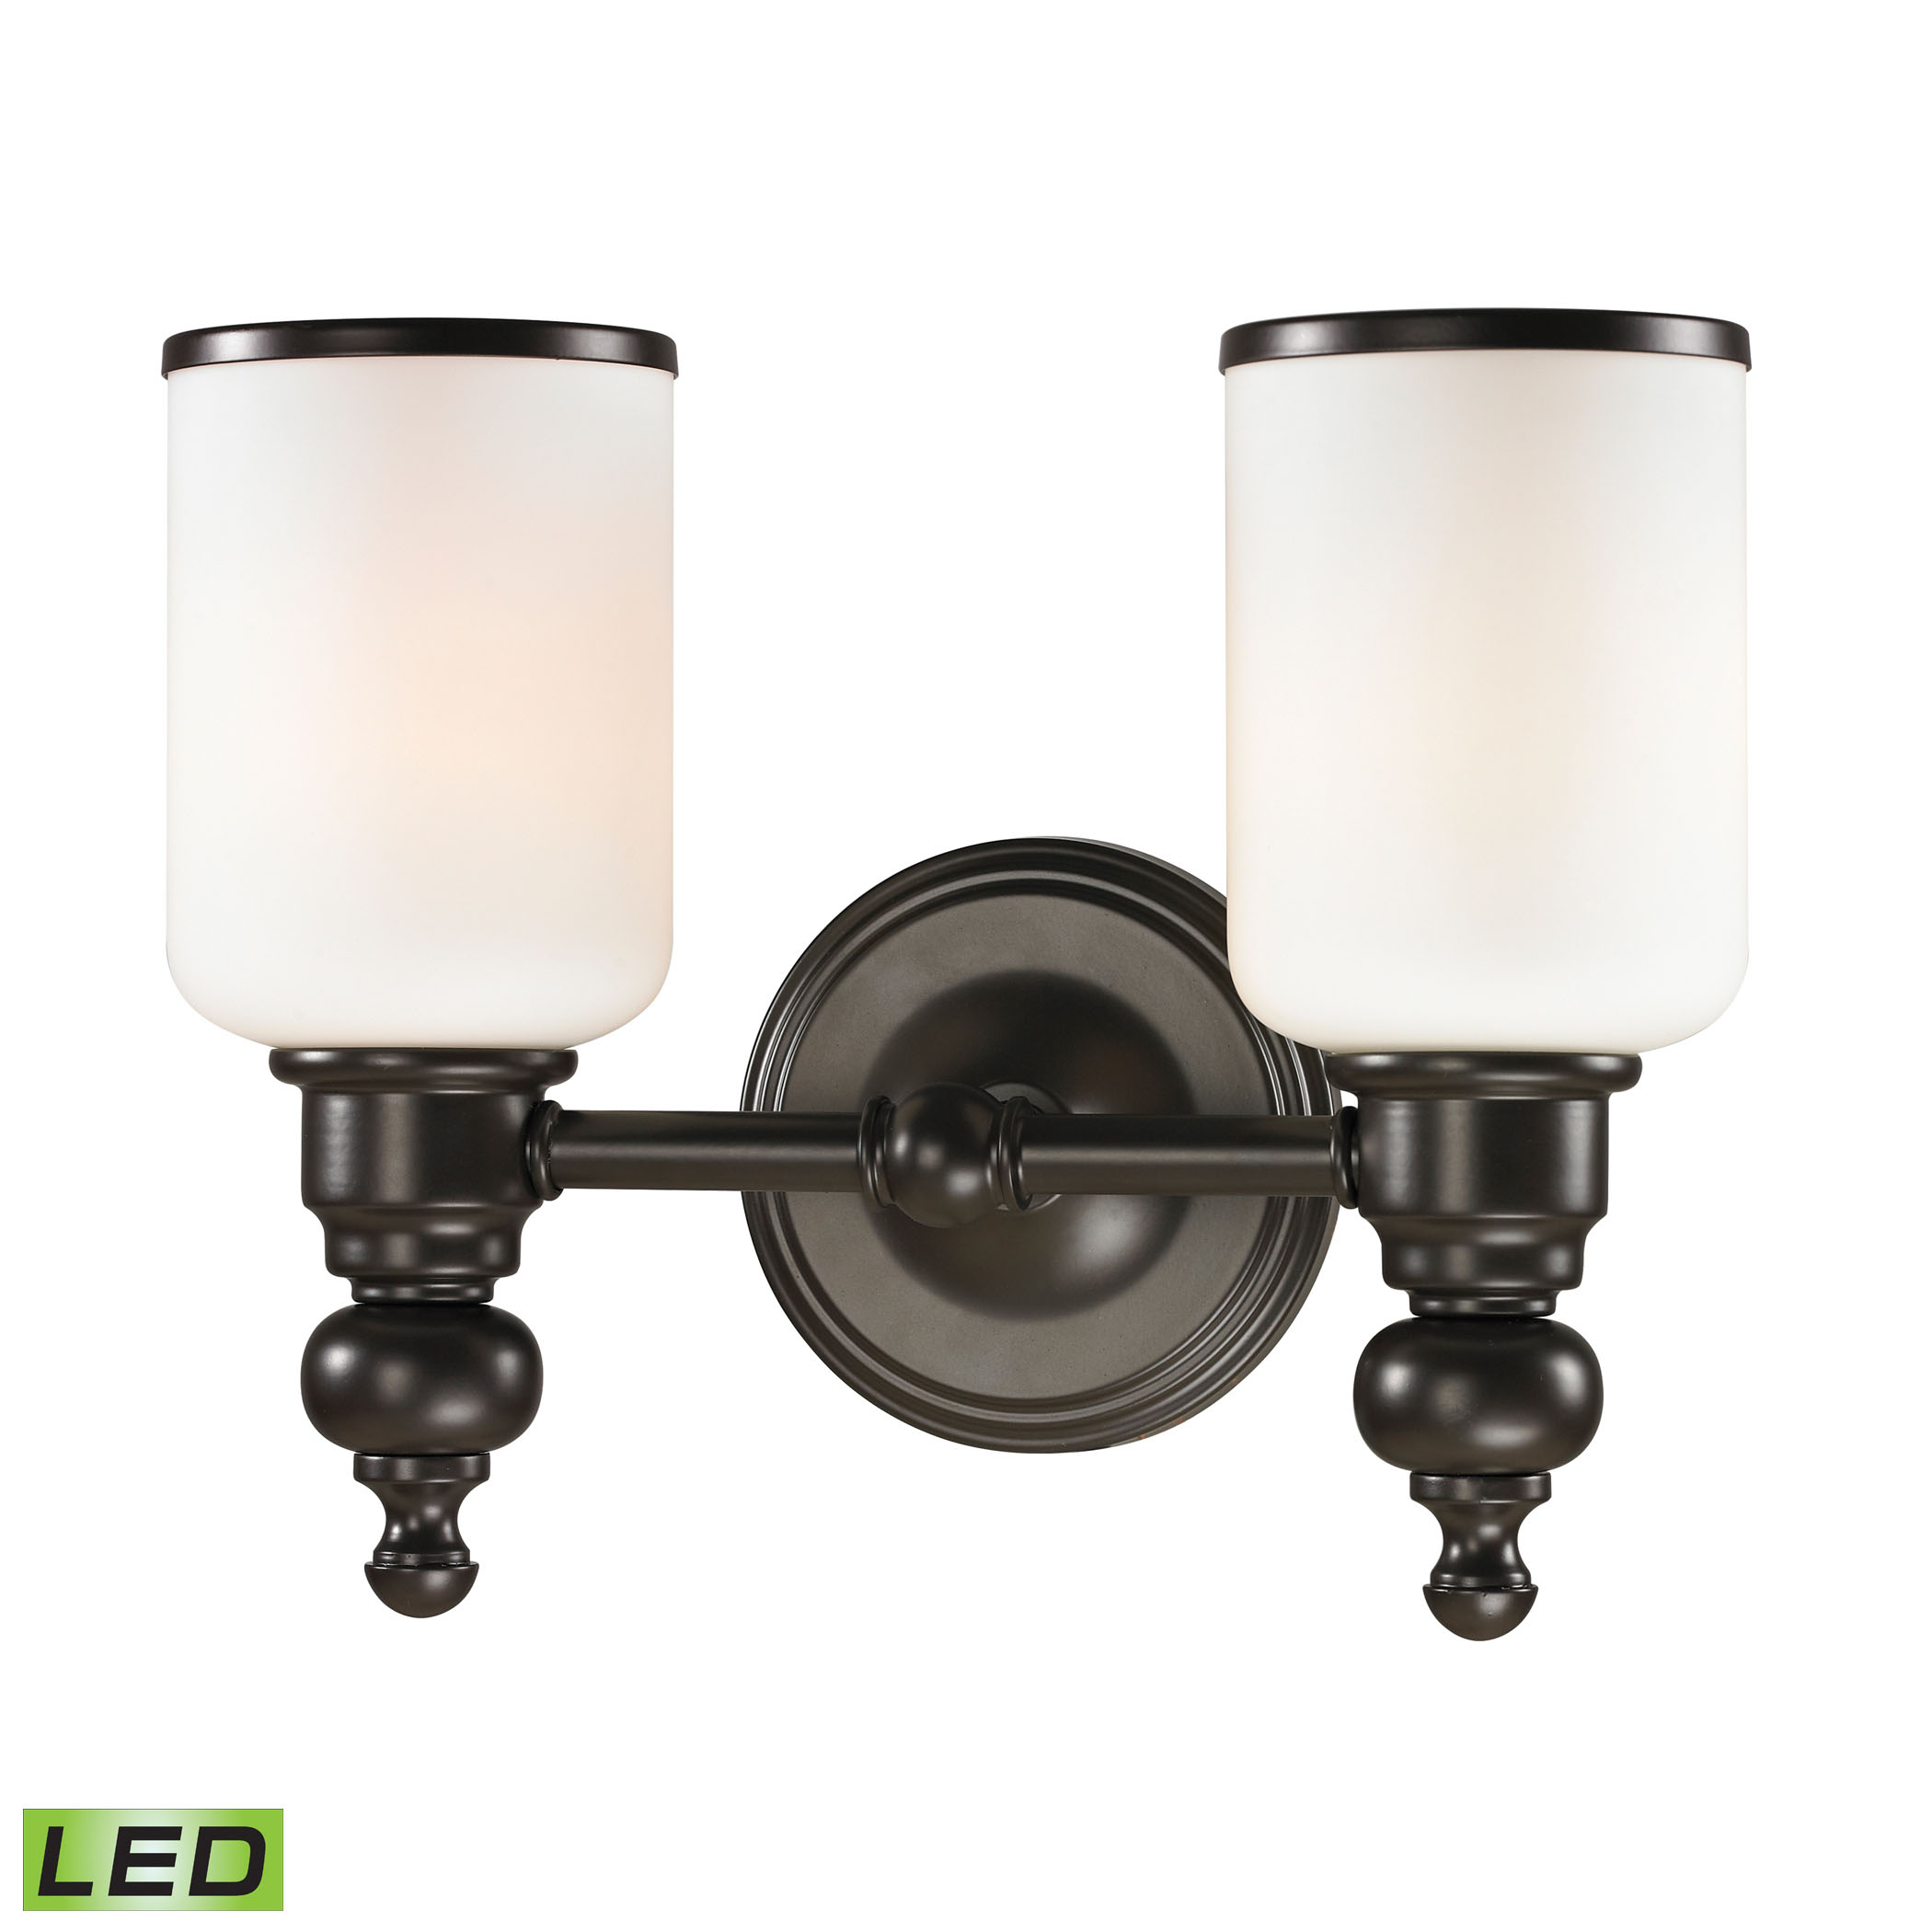 Bristol Collection 2 light bath in Oil Rubbed Bronze - LED, 800 Lumens (1600 Lumens Total) with Full